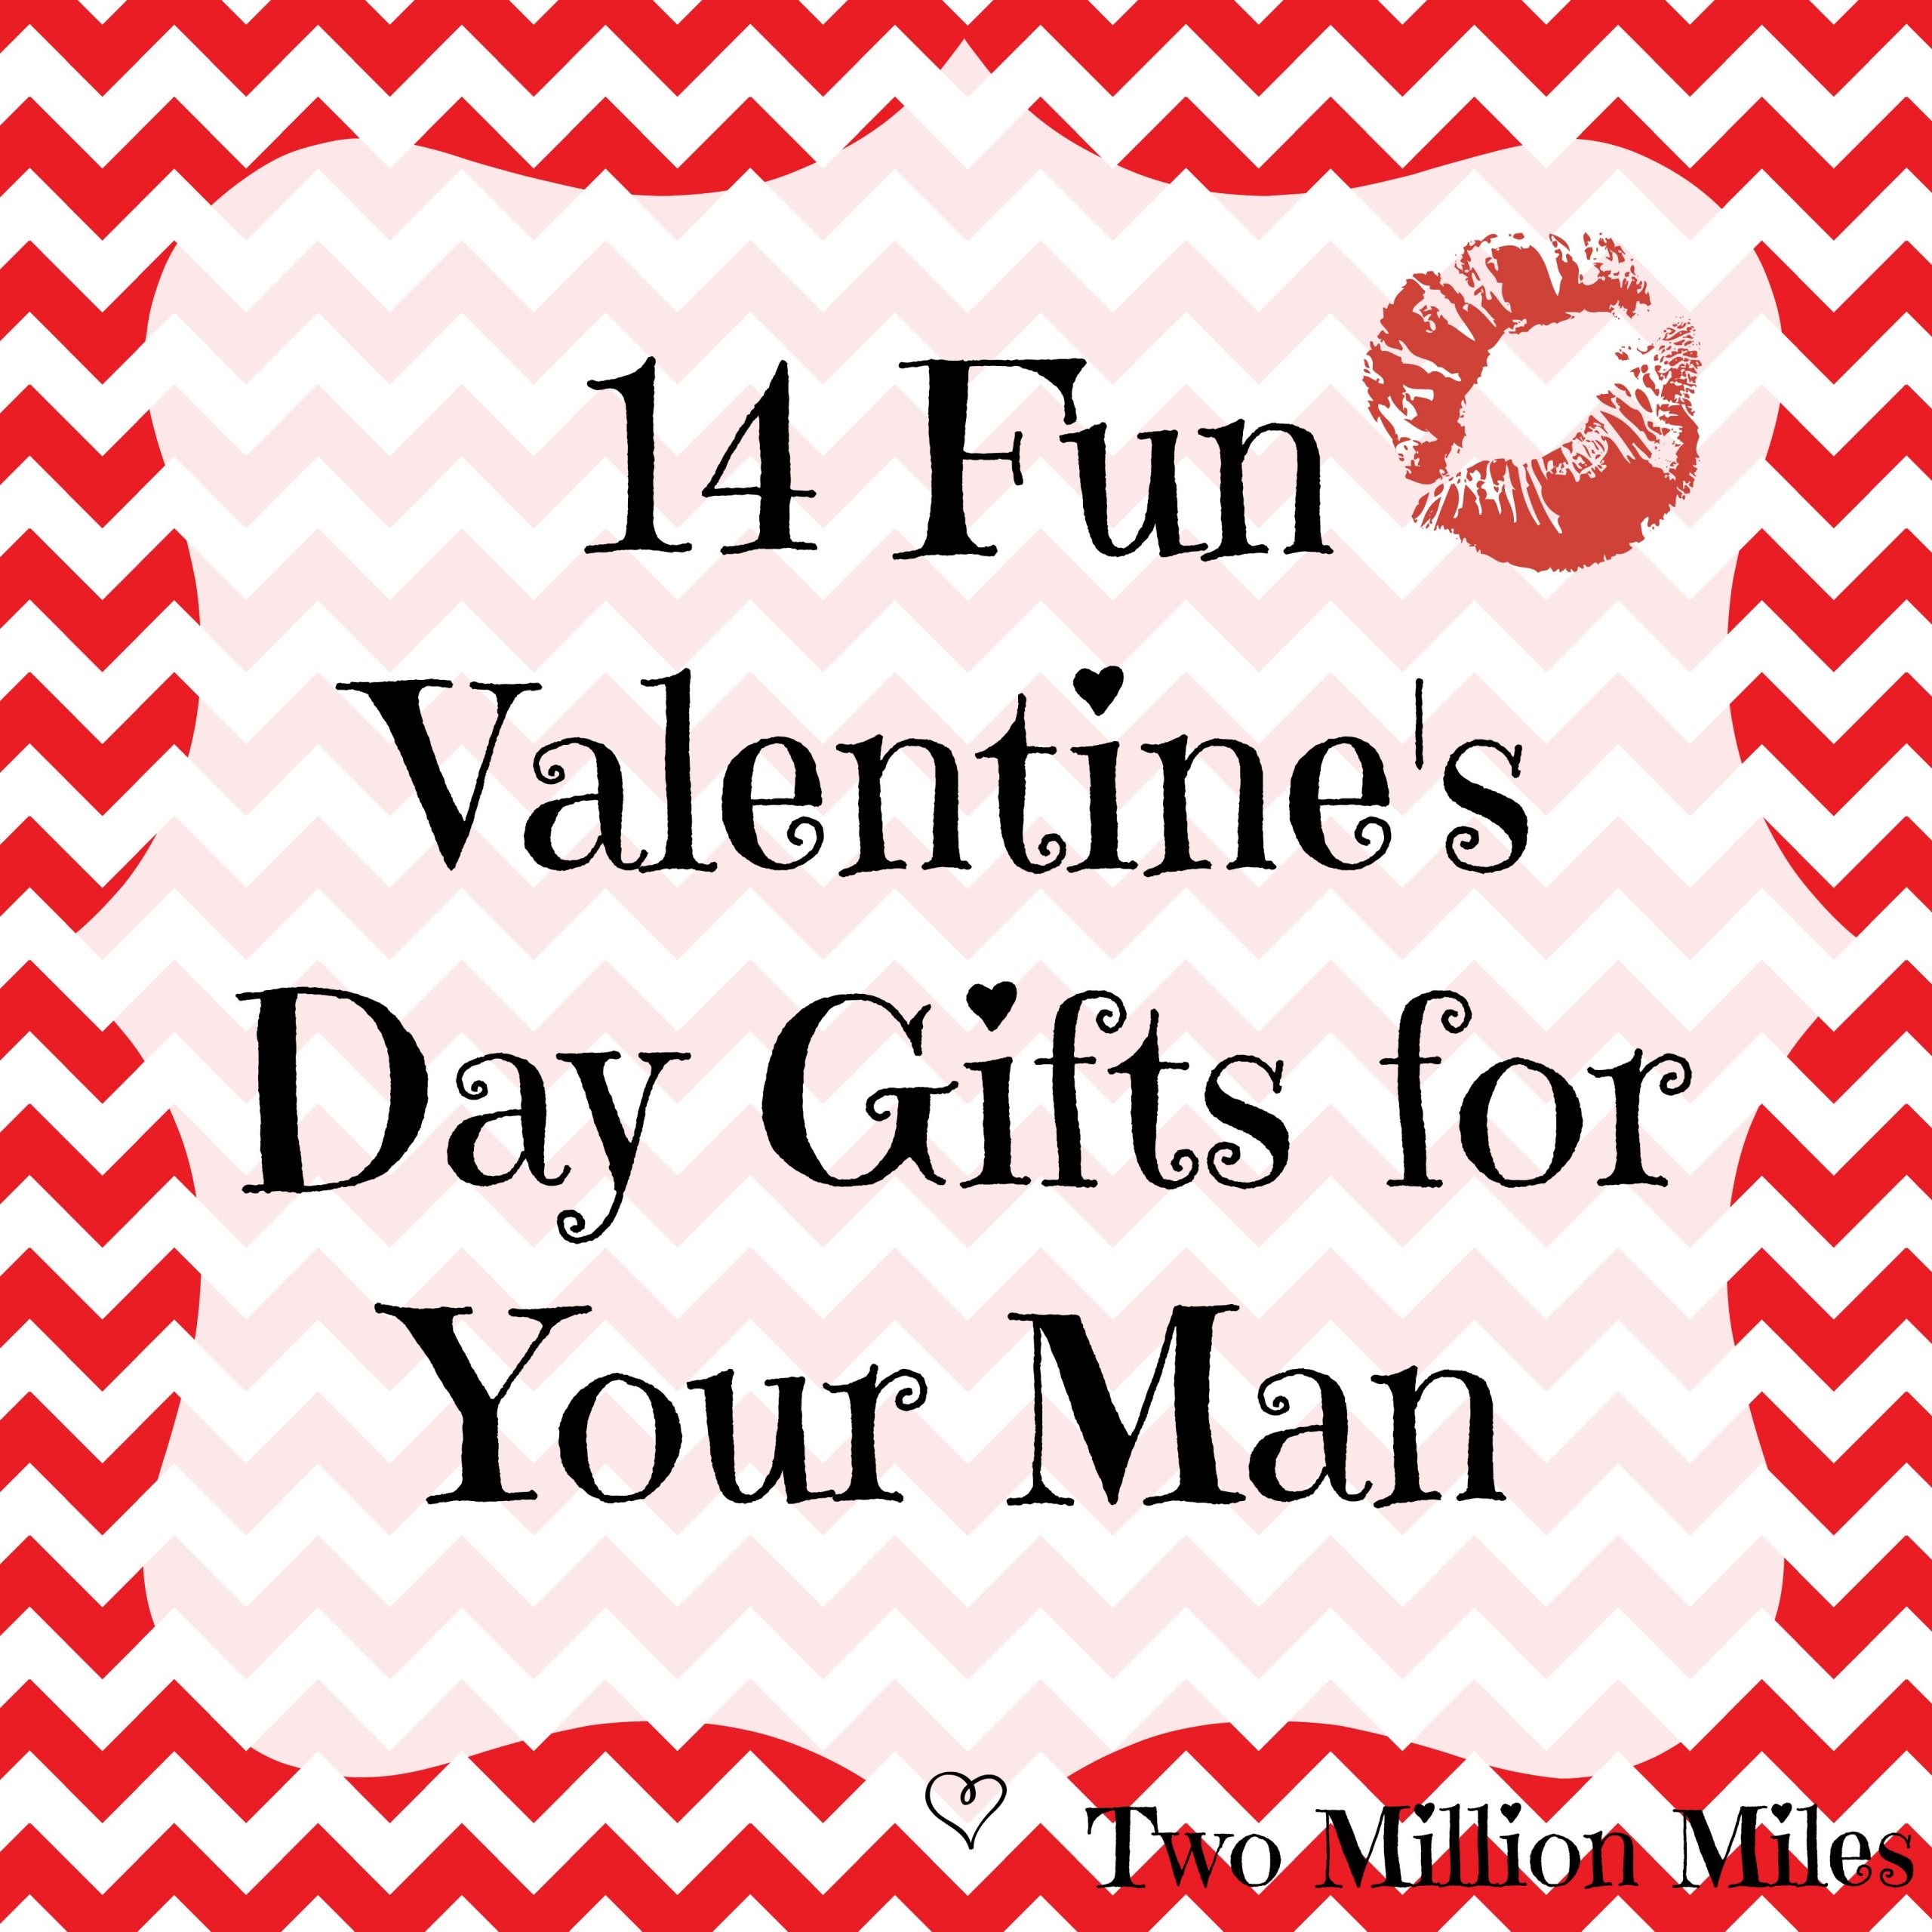 Cool Valentines Gift Ideas For Men
 14 Valentine’s Day Gifts for Your Man